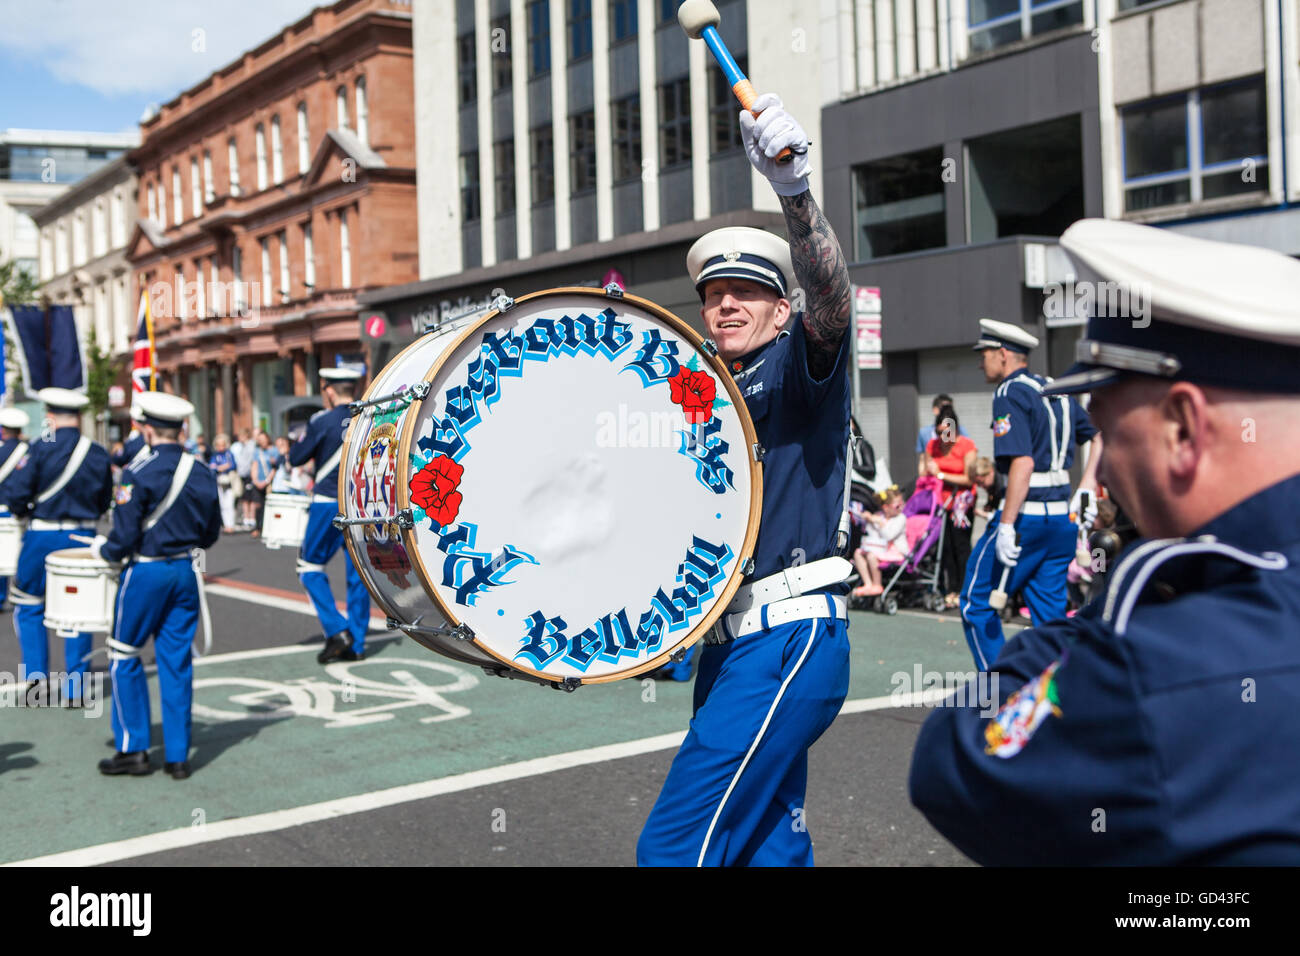 Belfast, UK. 12th July 2016. Lambeg drummer  from Protestant boys Bellshill celebrating the Twelfth. It originated during the late 18th century in Ulster. It celebrates the Glorious Revolution (1688) and victory of Protestant king William of Orange over Catholic king James II at the Battle of the Boyne (1690) Credit:  Bonzo/Alamy Live News Stock Photo